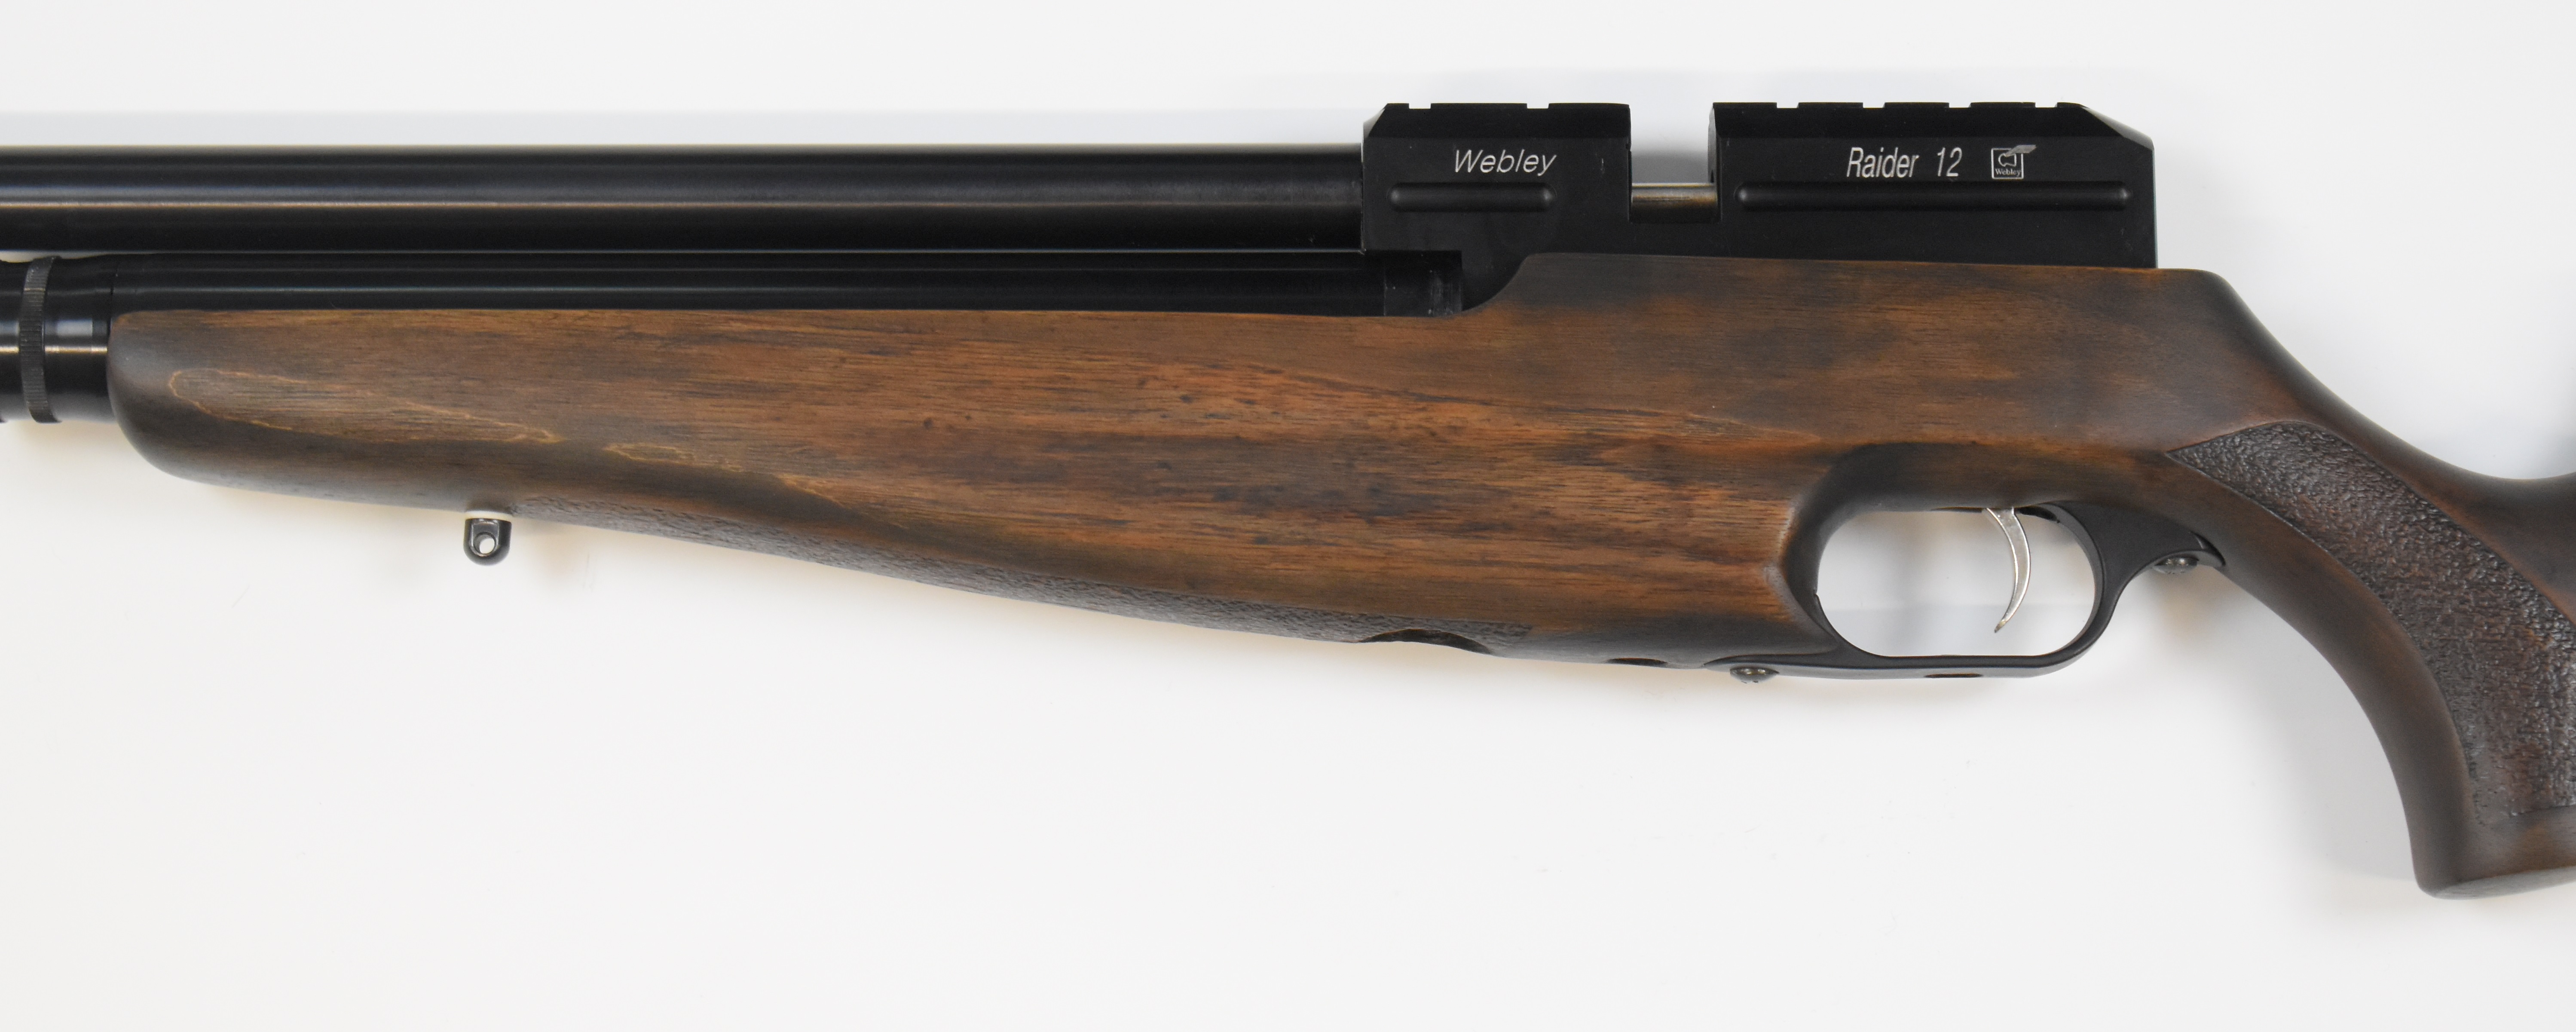 Webley Raider 12 .22 PCP air rifle with aluminium carbine cylinder, textured semi-pistol grip and - Image 8 of 11